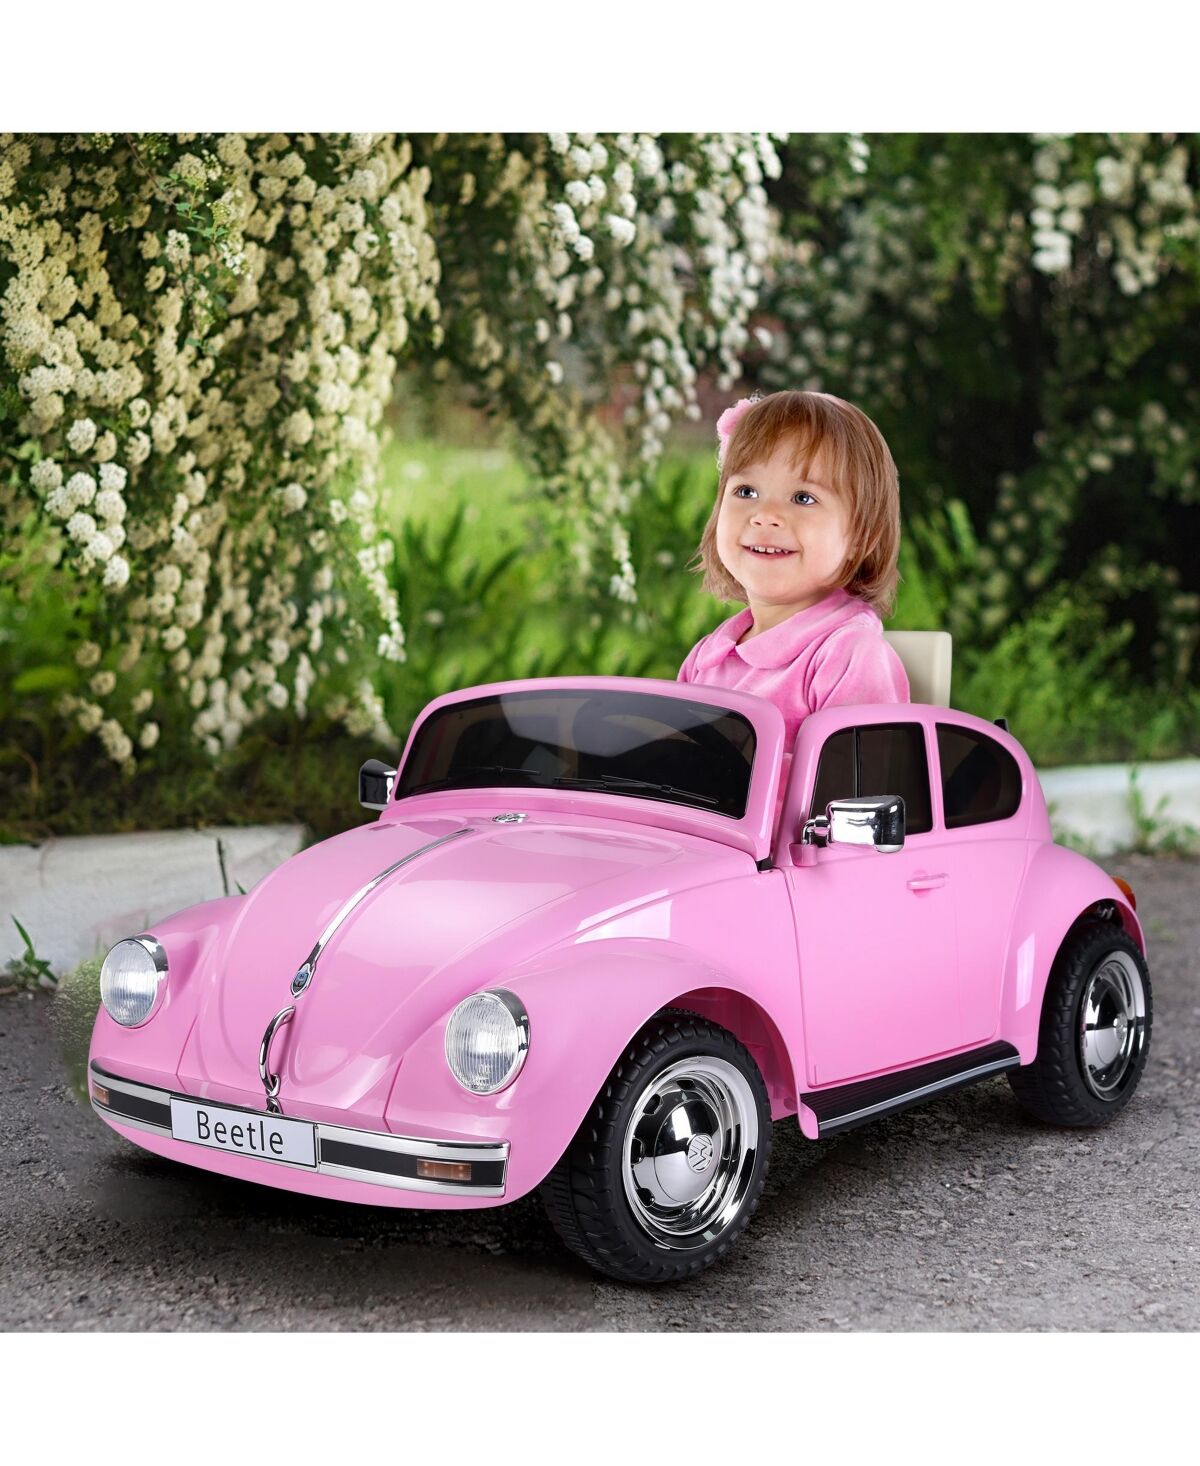 Aosom Licensed Volkswagen Electric Kids Ride-On Car 6V Battery Powered Toy - Pink